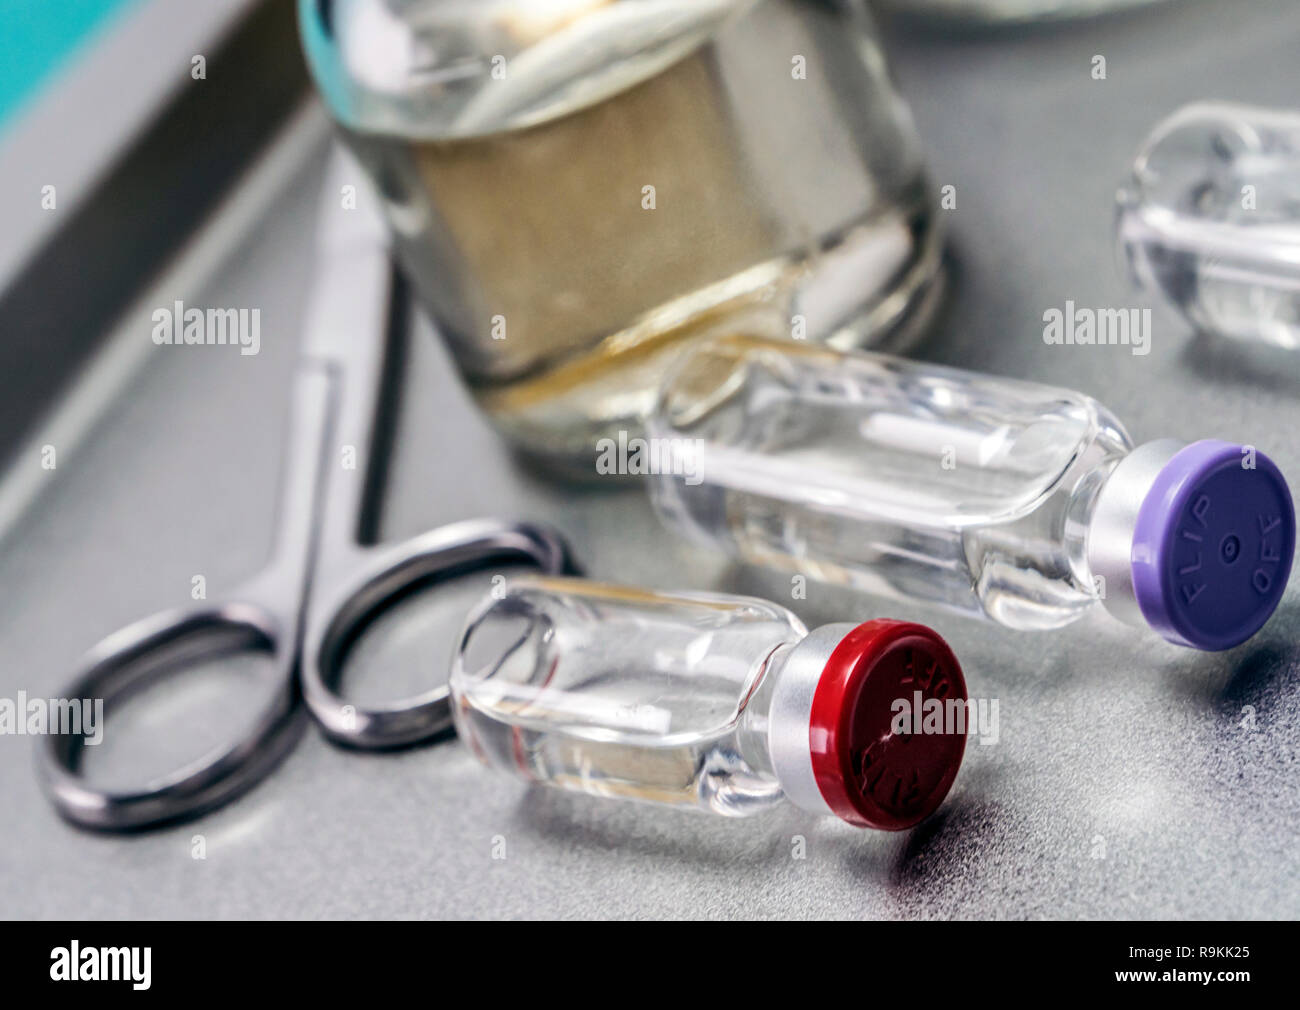 Some vials next to a syringe Stock Photo